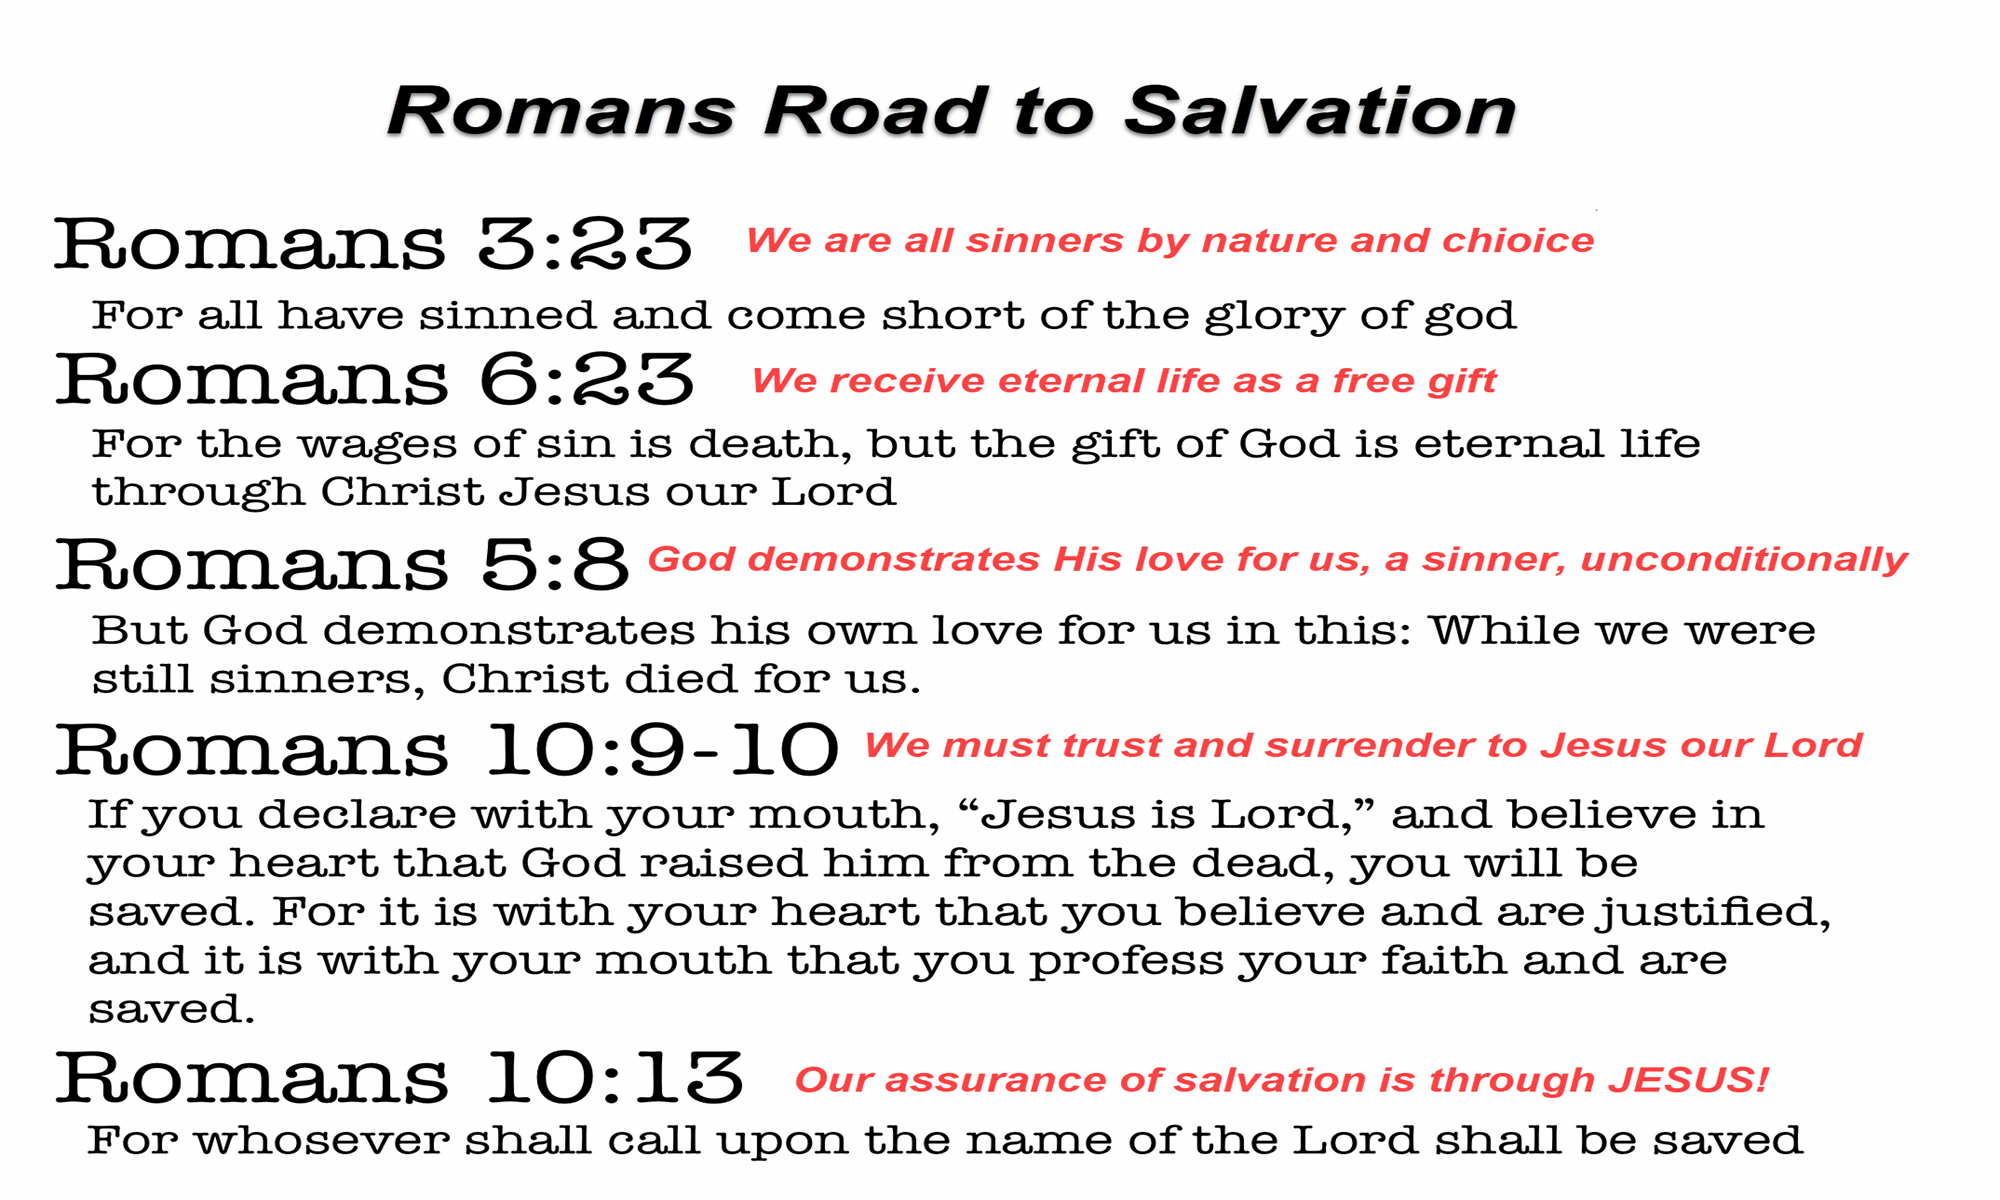 Share Romans Road Romans Road To Salvation